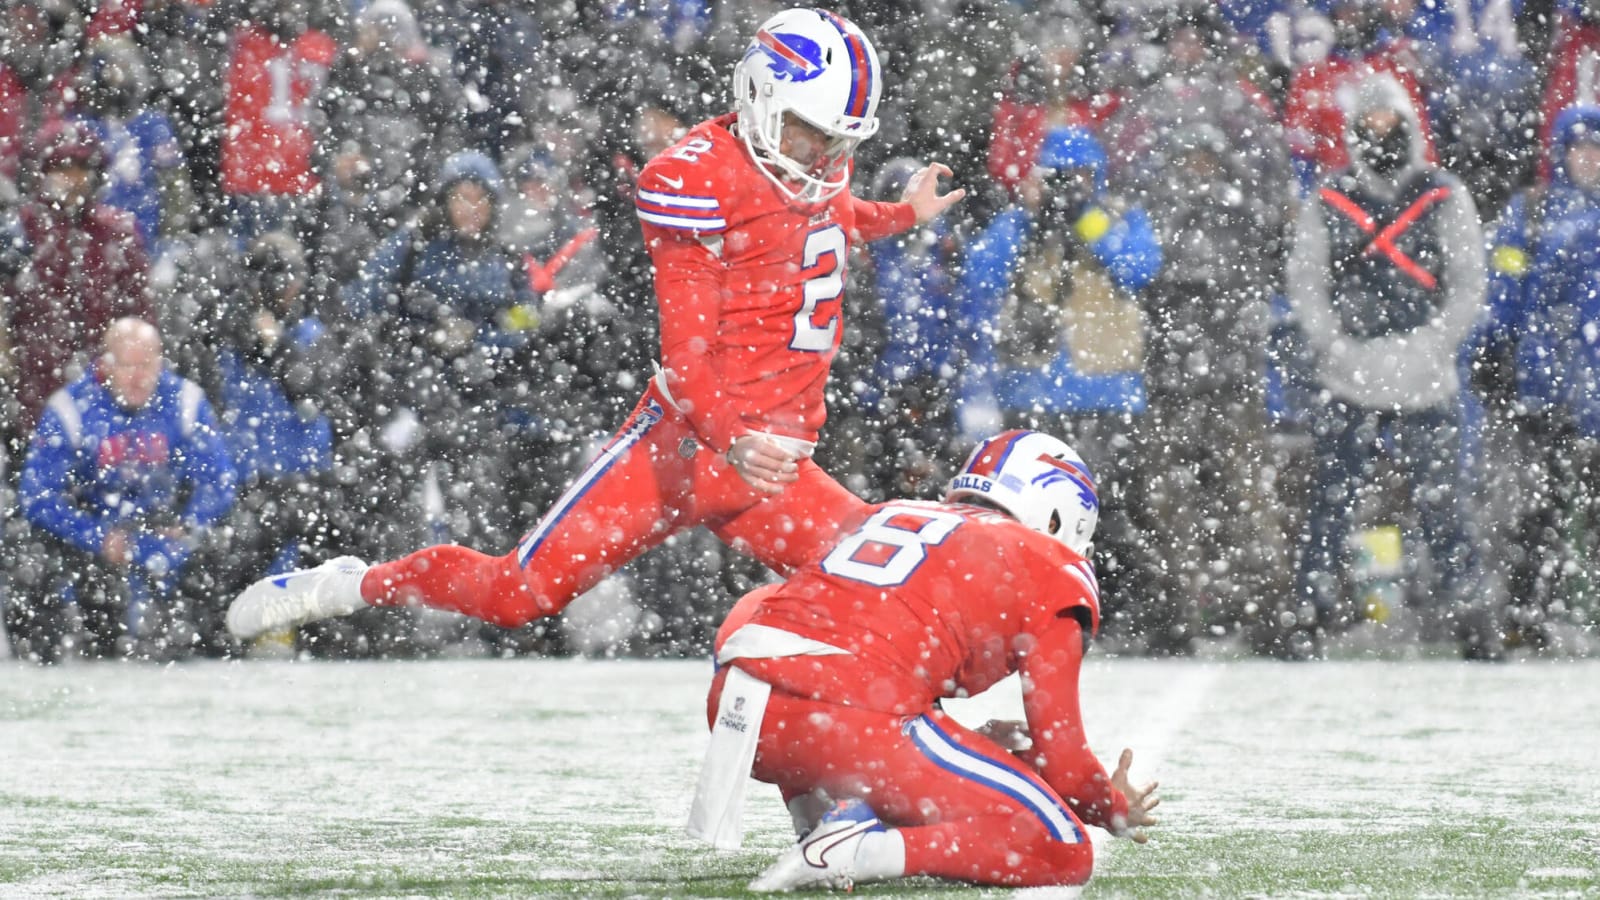 Bass nails FG to send Bills to playoffs, celebrates with slide in snow